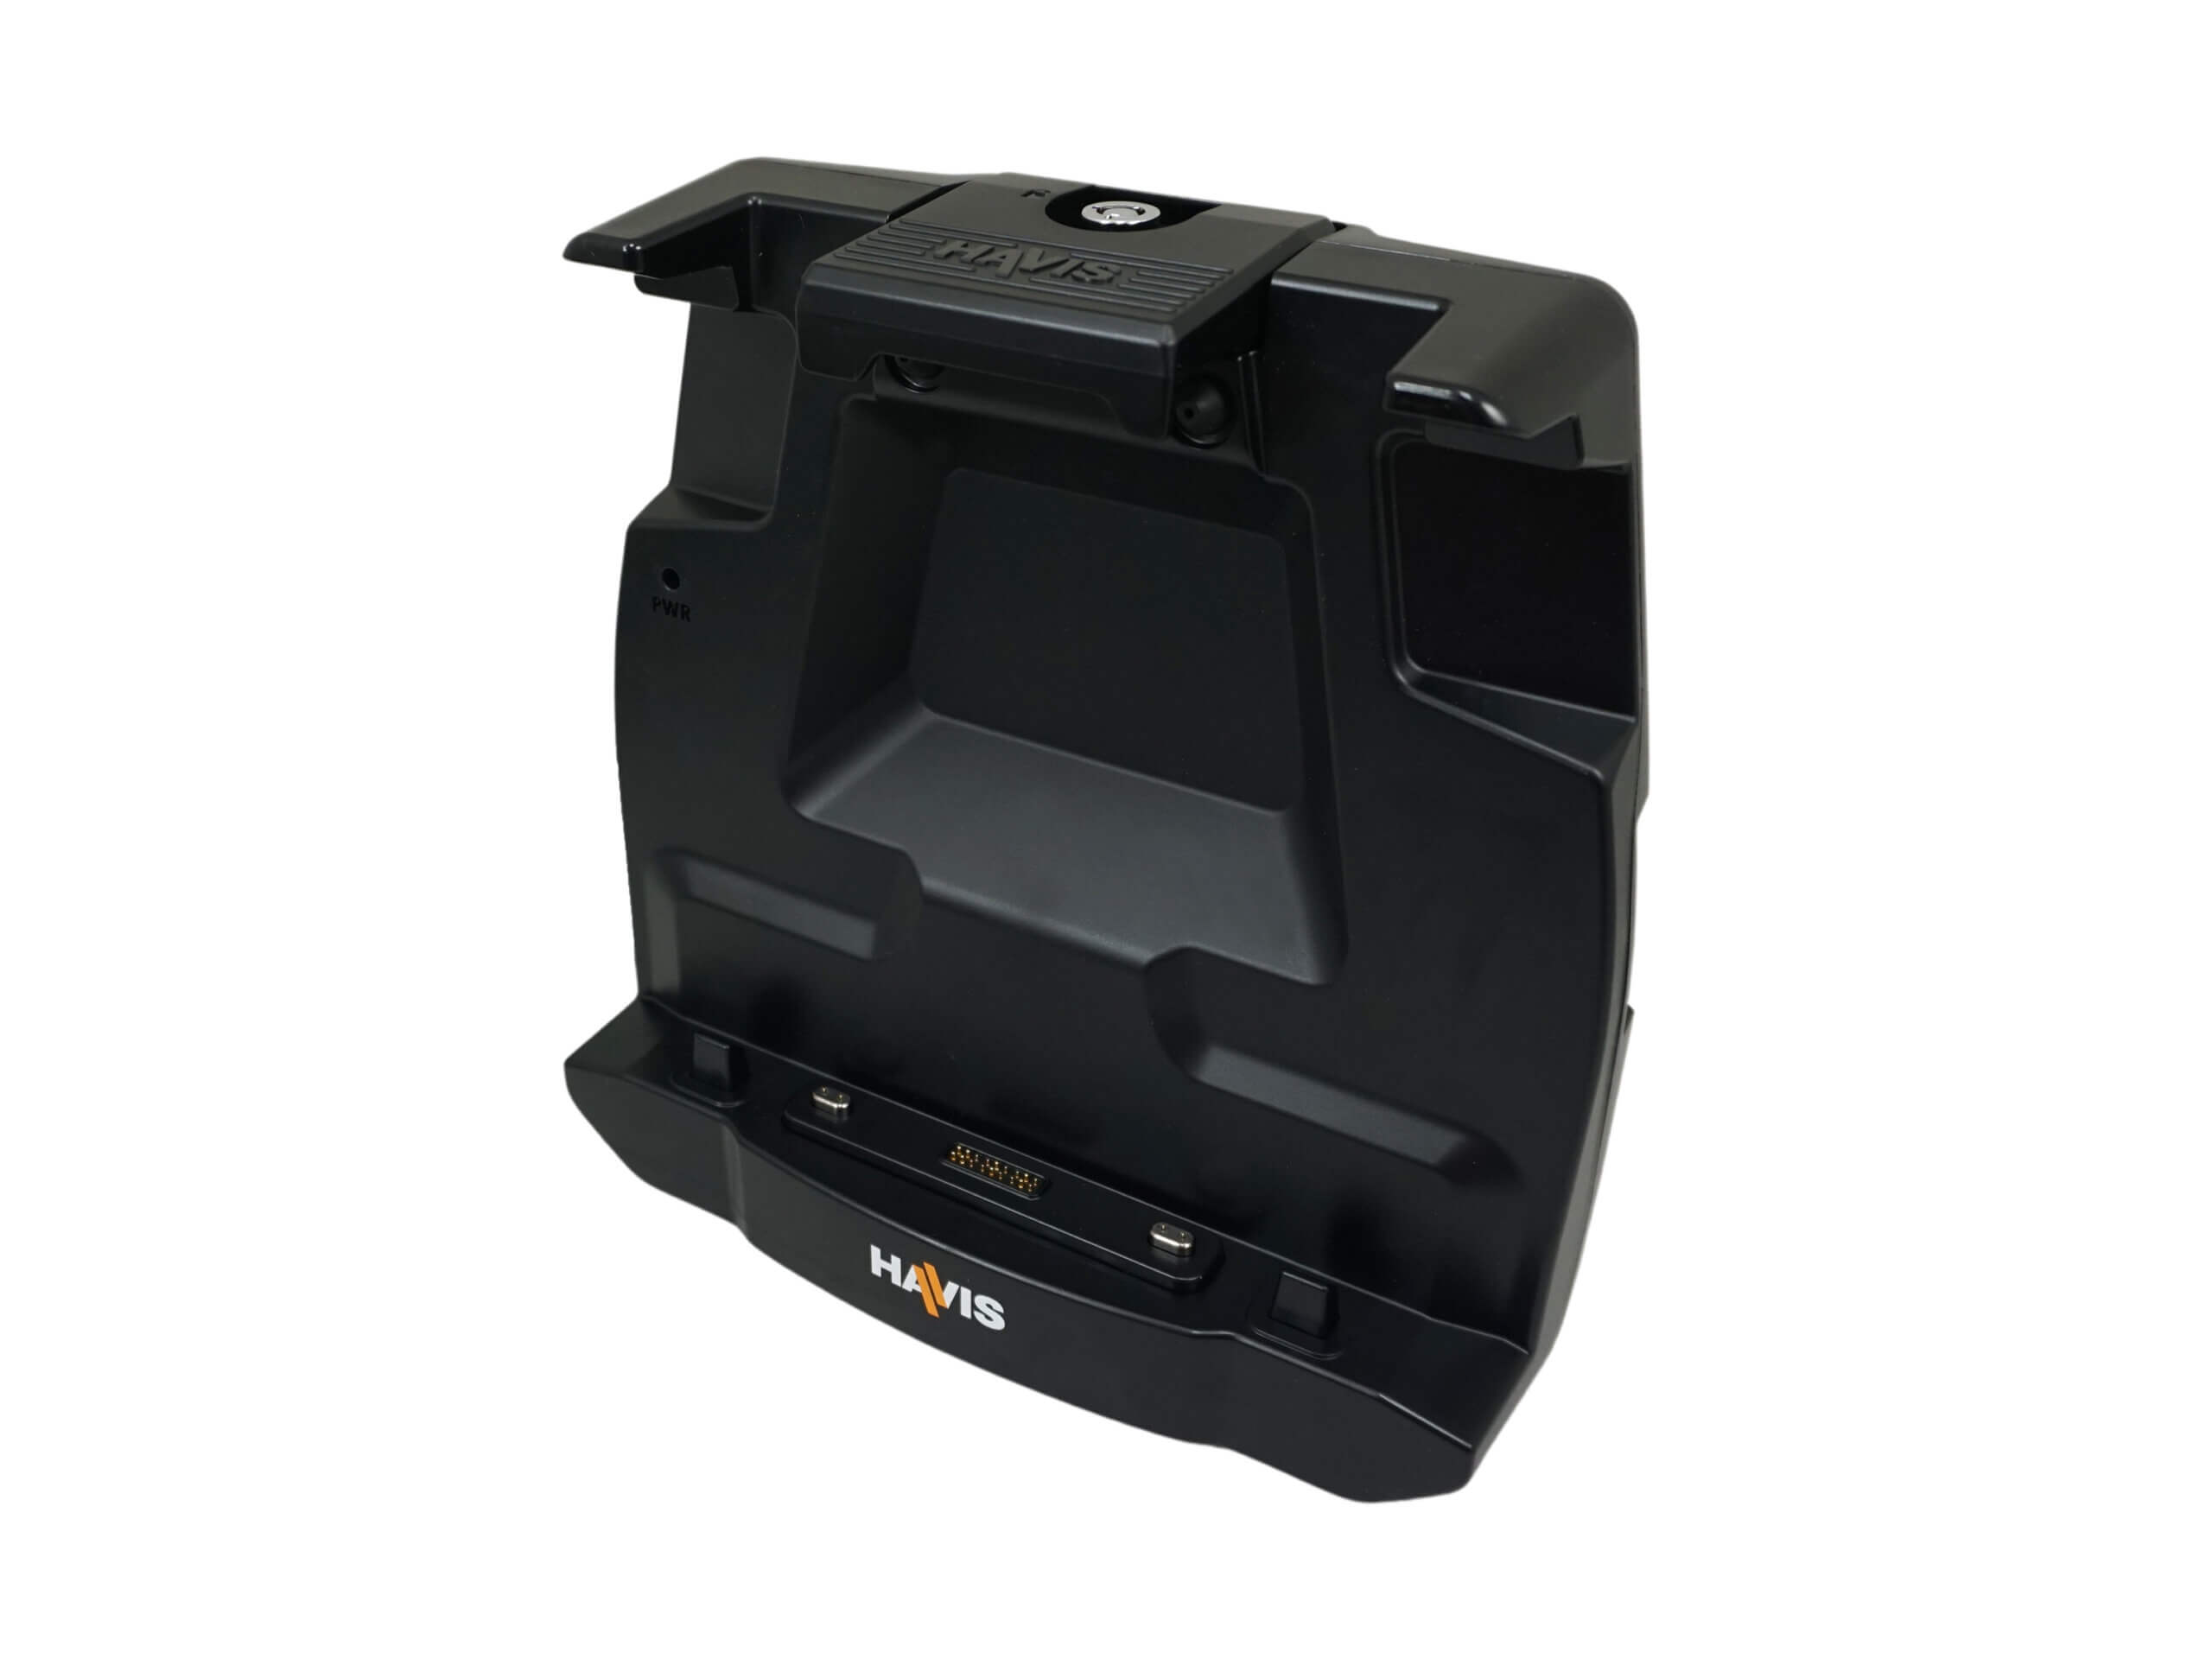 Docking Station for Dell’s 7230 Tablet with Standard Port Replication & Quad Pass-Thru Antenna Connection